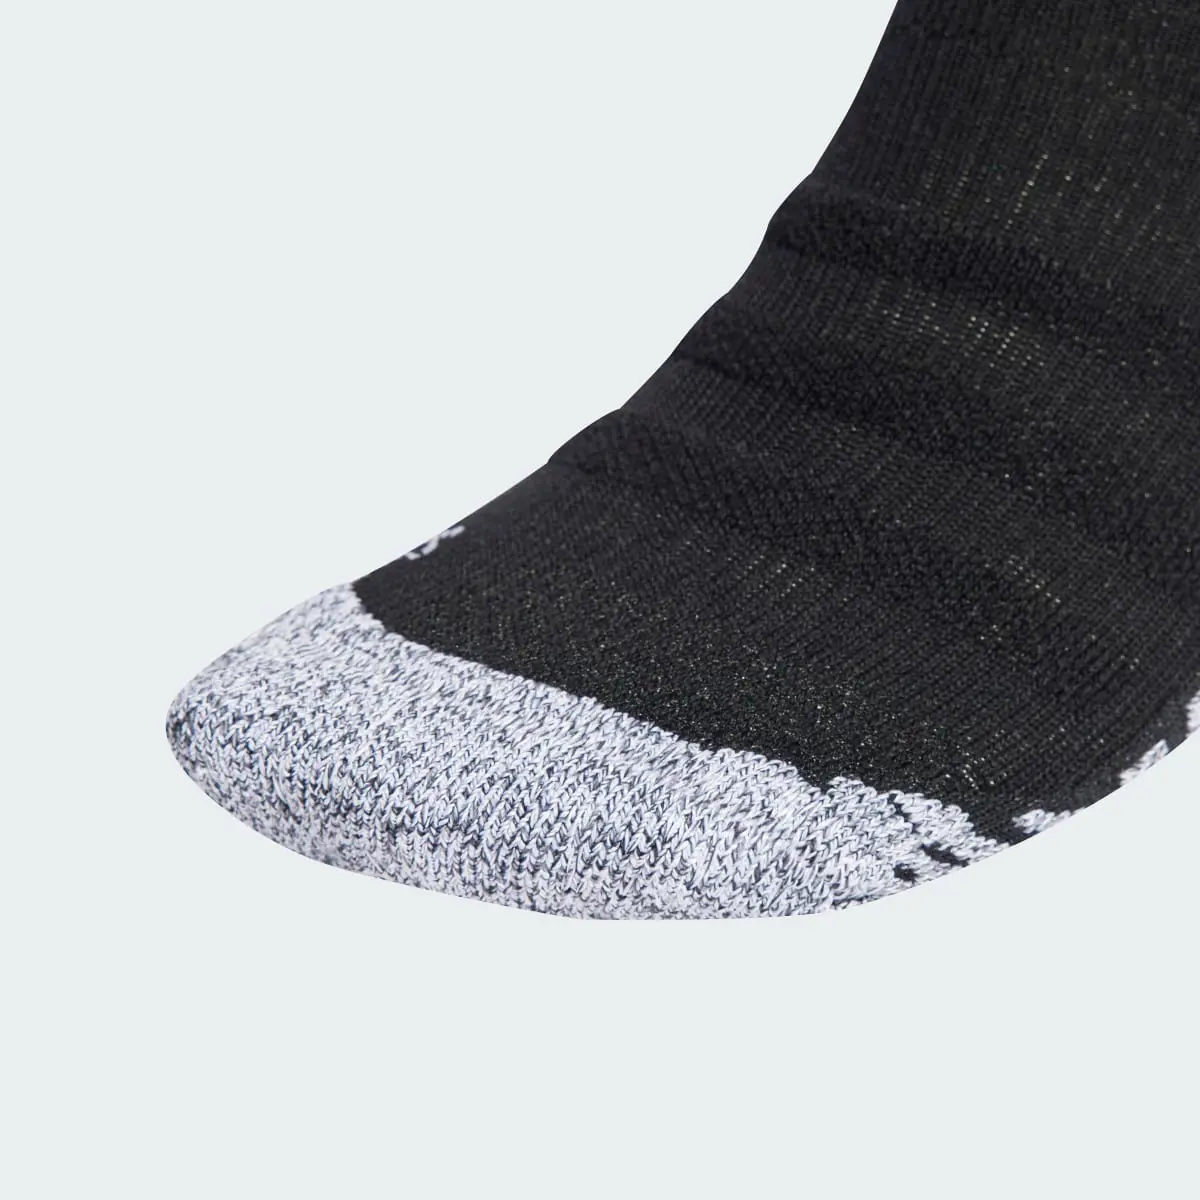 Adidas Chaussettes montantes All Blacks Rugby. 3